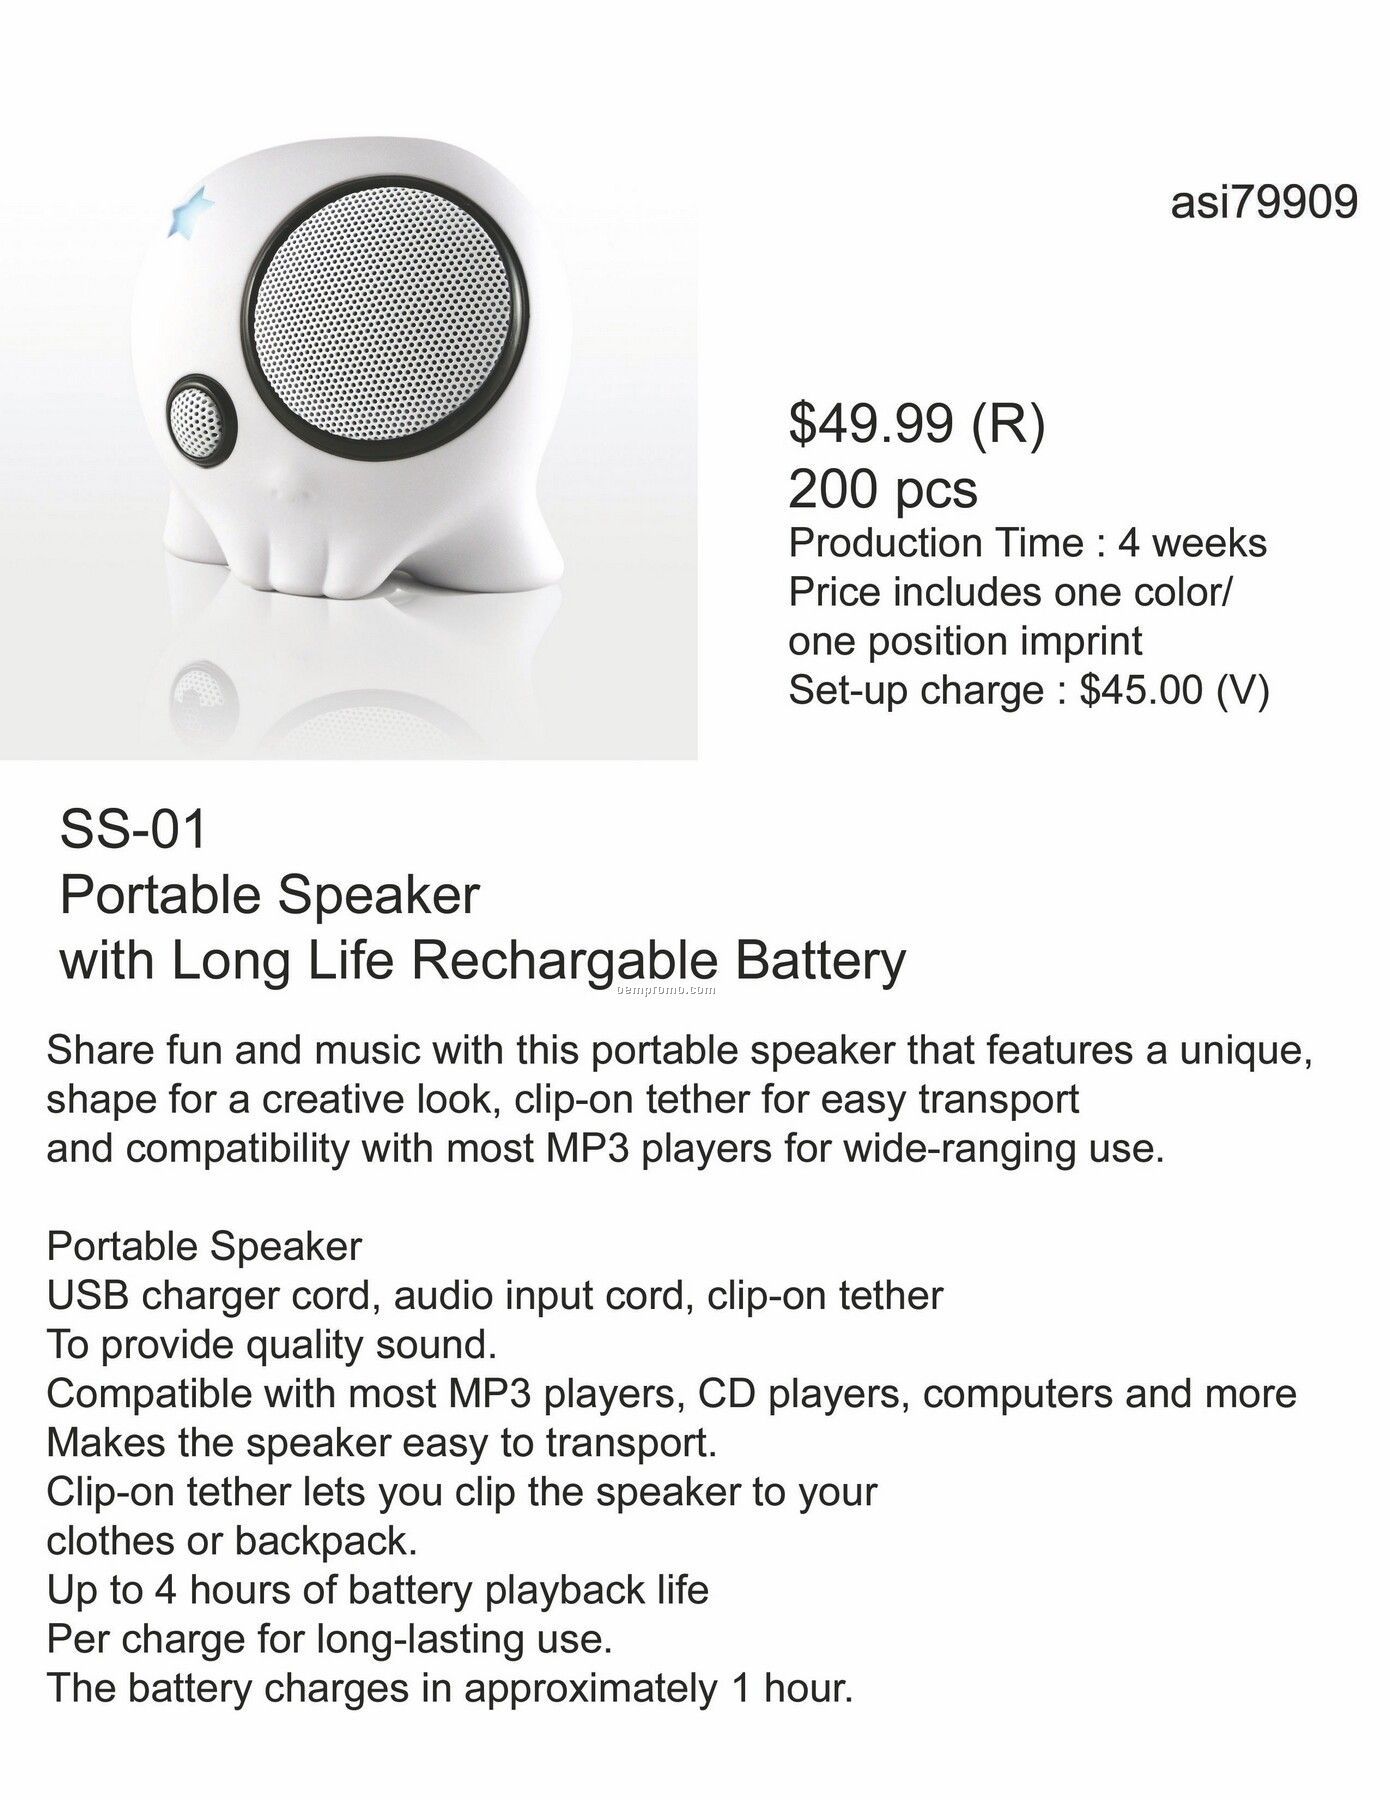 Portable Speaker With Rechargeable Battery